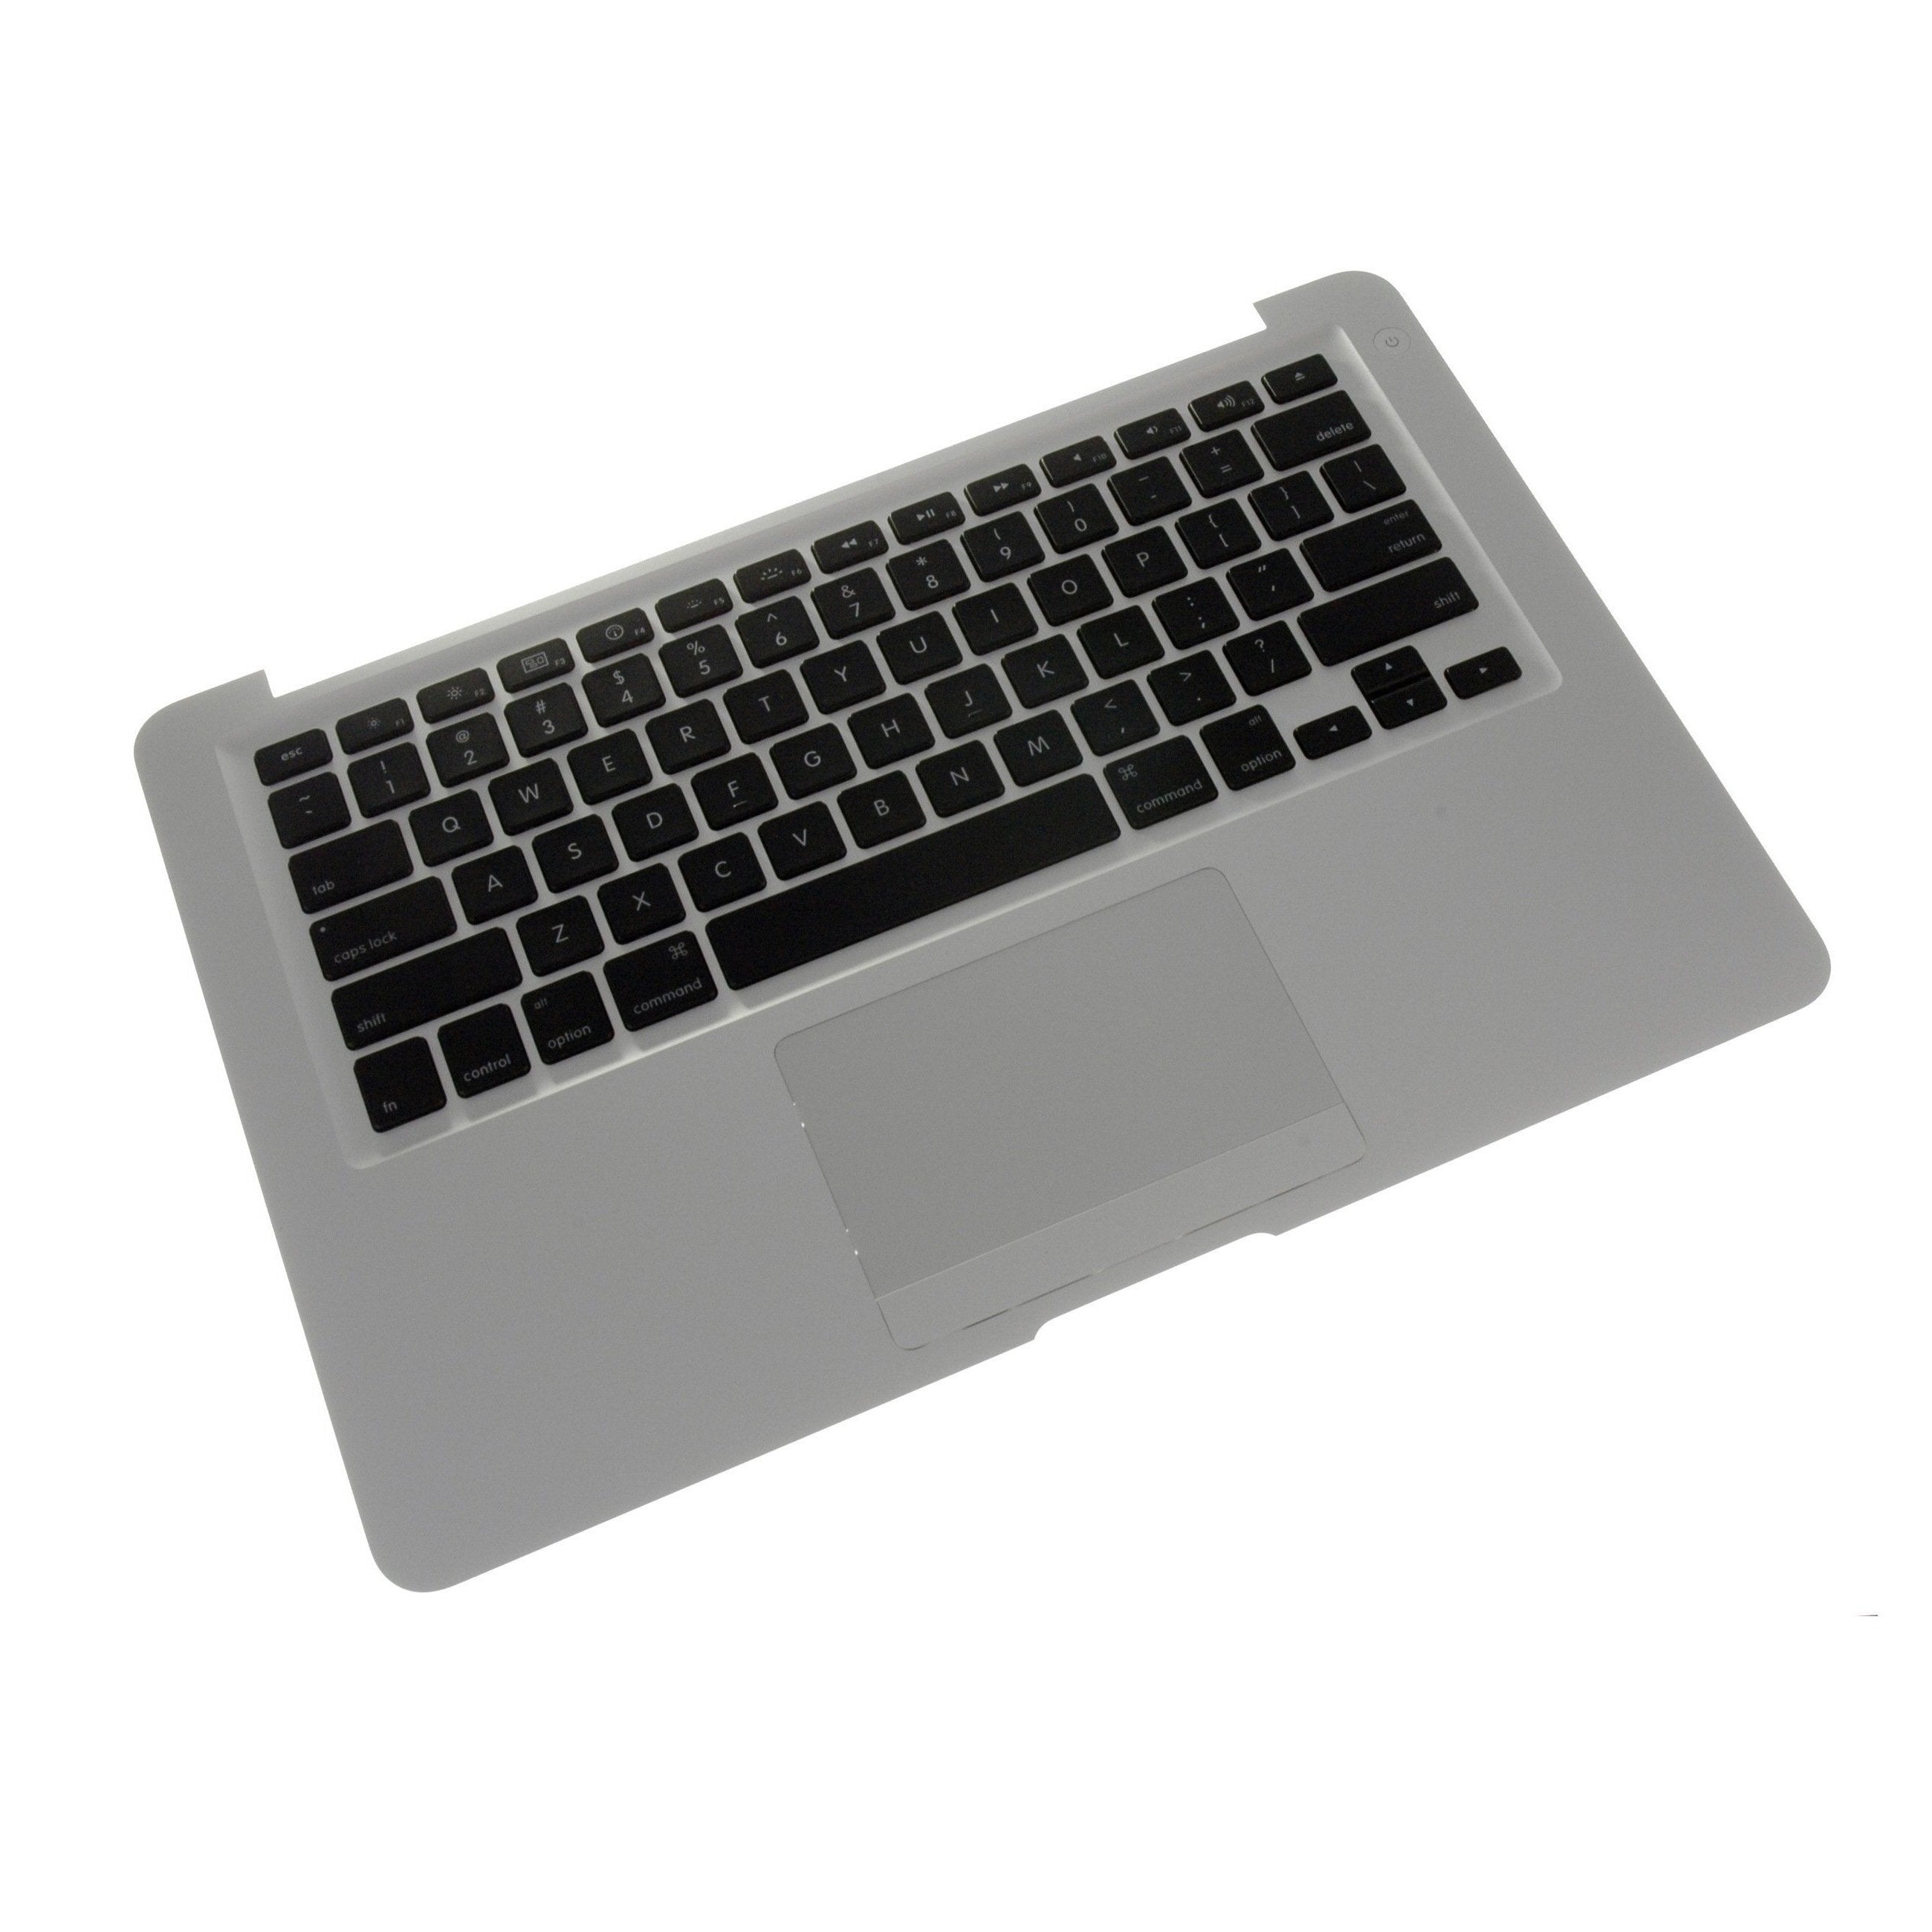 MacBook Air (Original) Upper Case with Keyboard Used, A-Stock English Keyboard